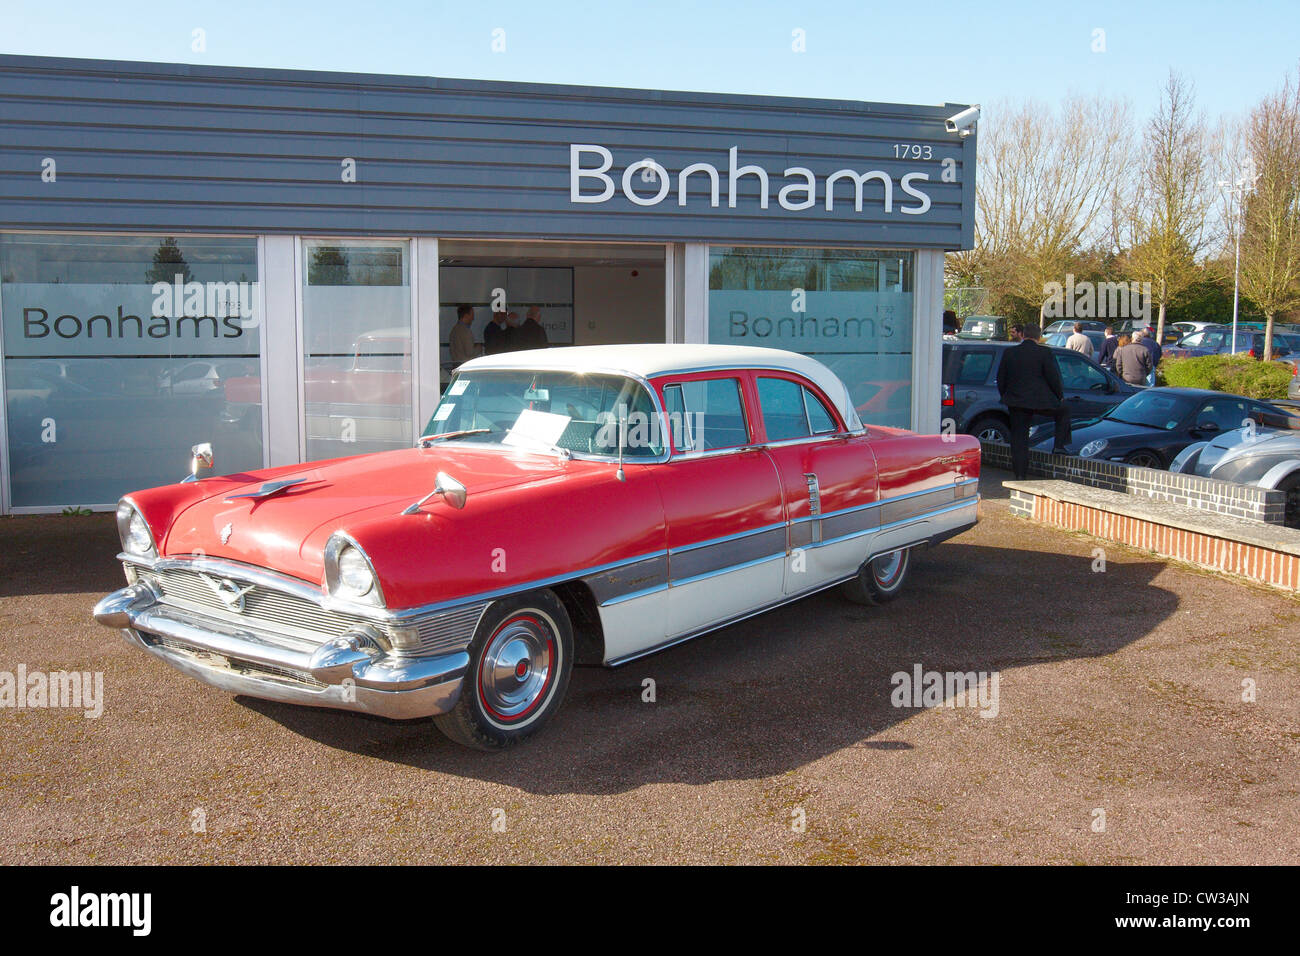 A 1956 Packard Patrician Sedan forms part of a classic car auction sale being held at Bonhams Oxford Stock Photo